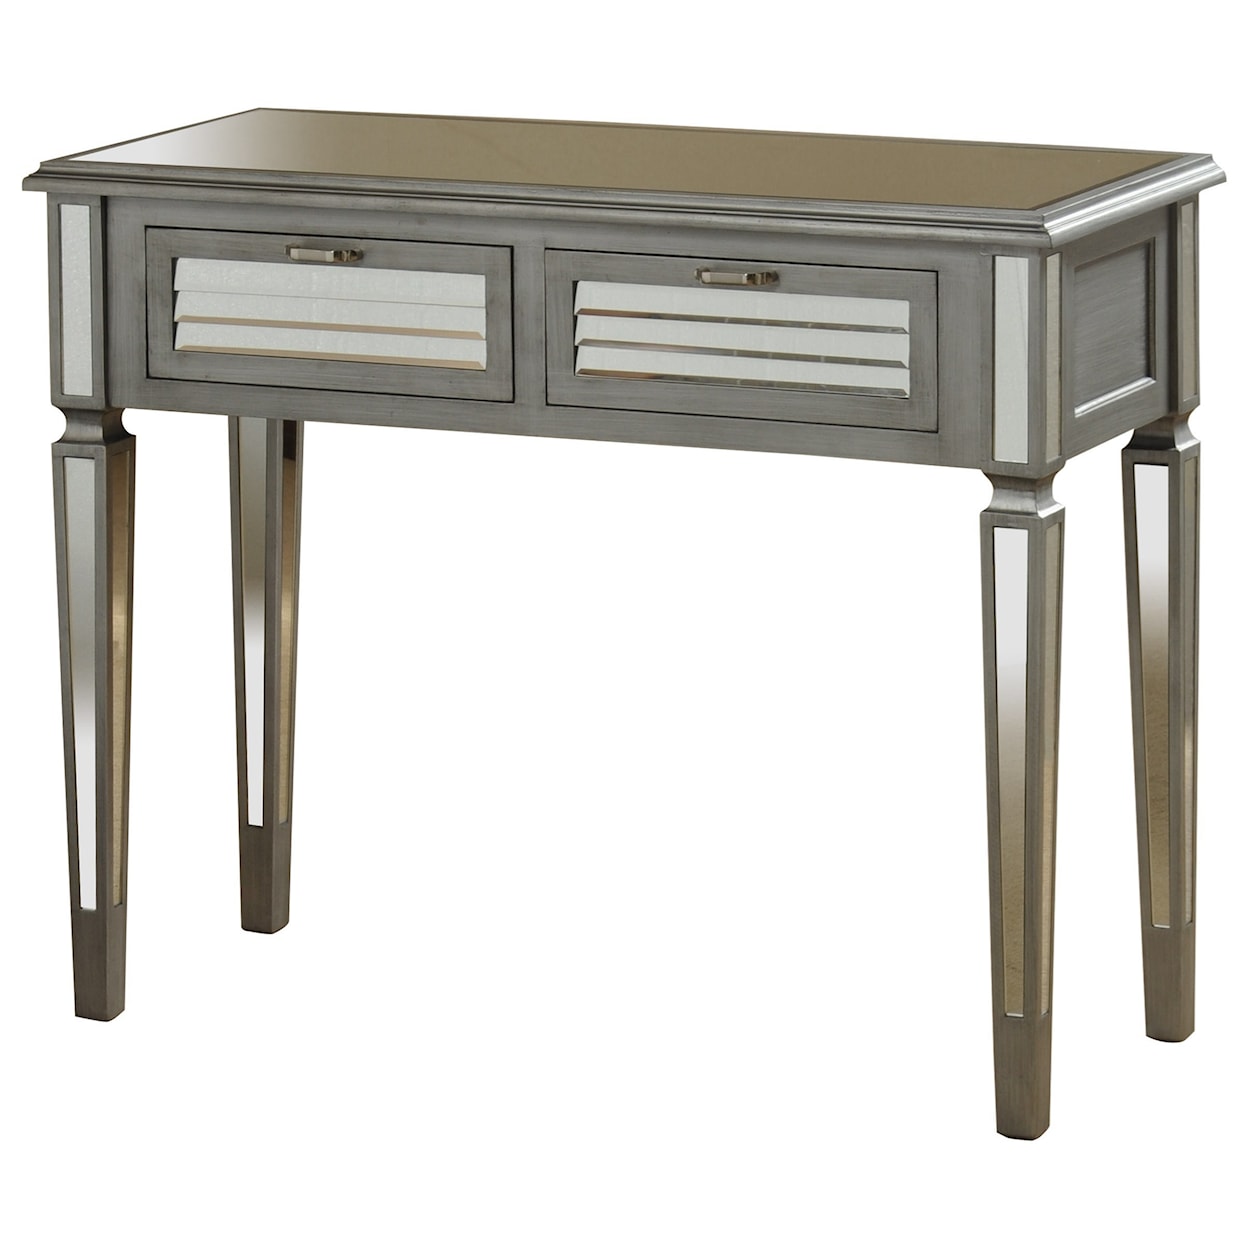 StyleCraft Occasional Tables 2 Drawer Console Table